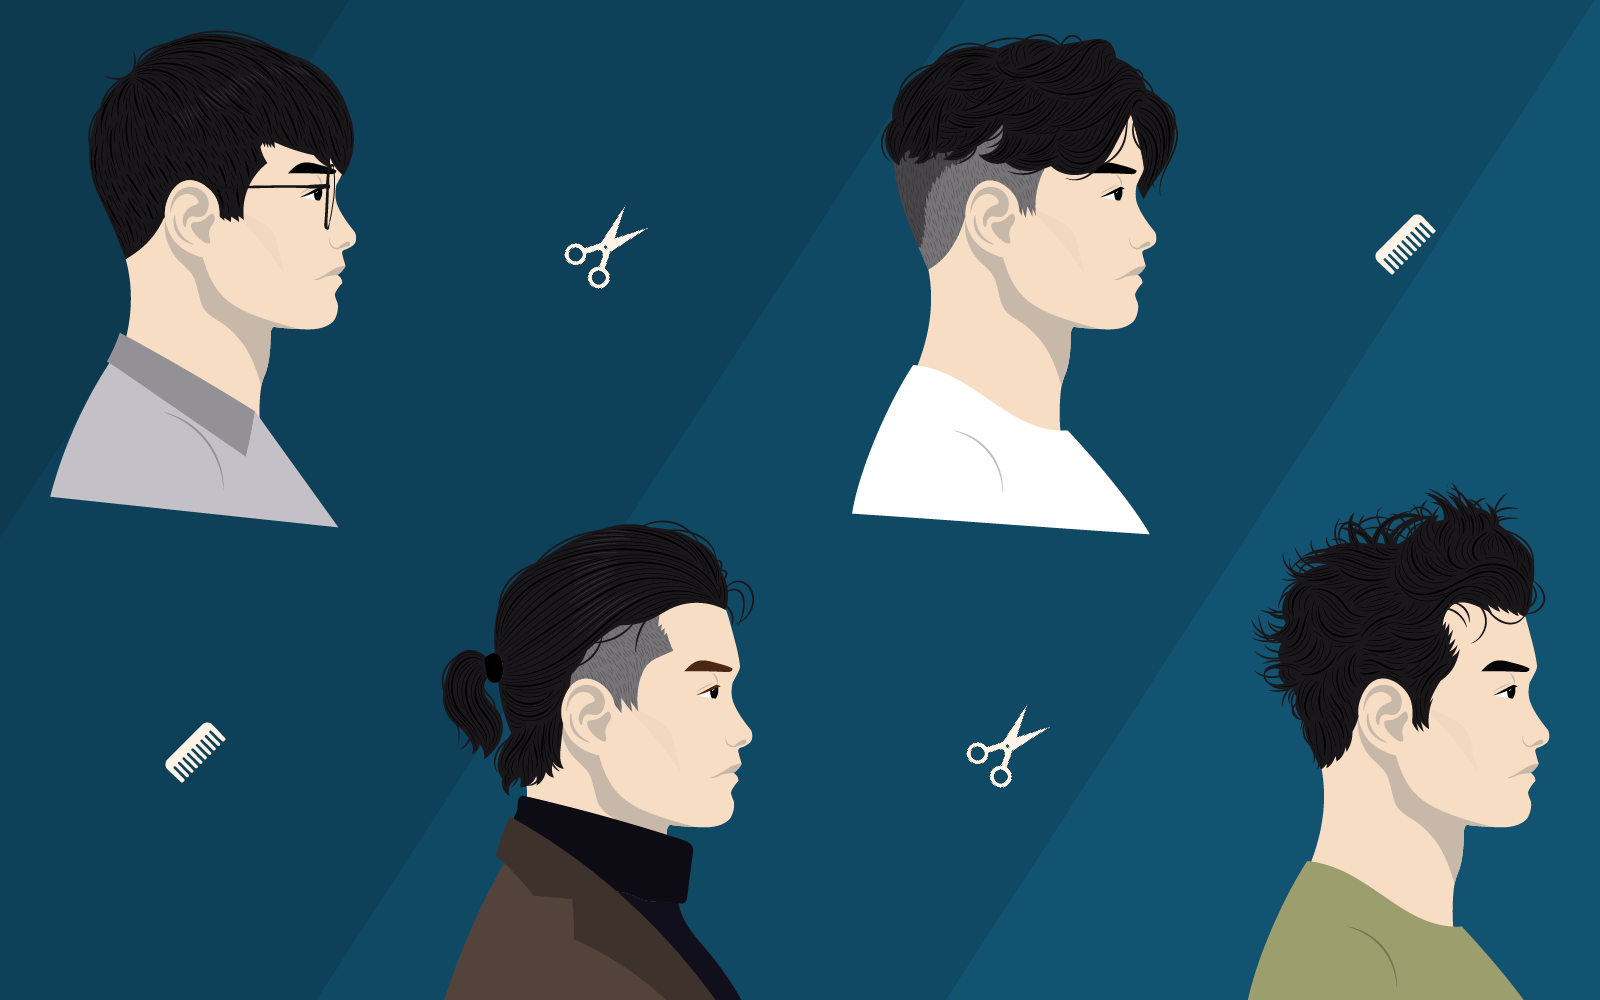 The 20 Best Asian Men's Hairstyles for 2023 - The Modest Man